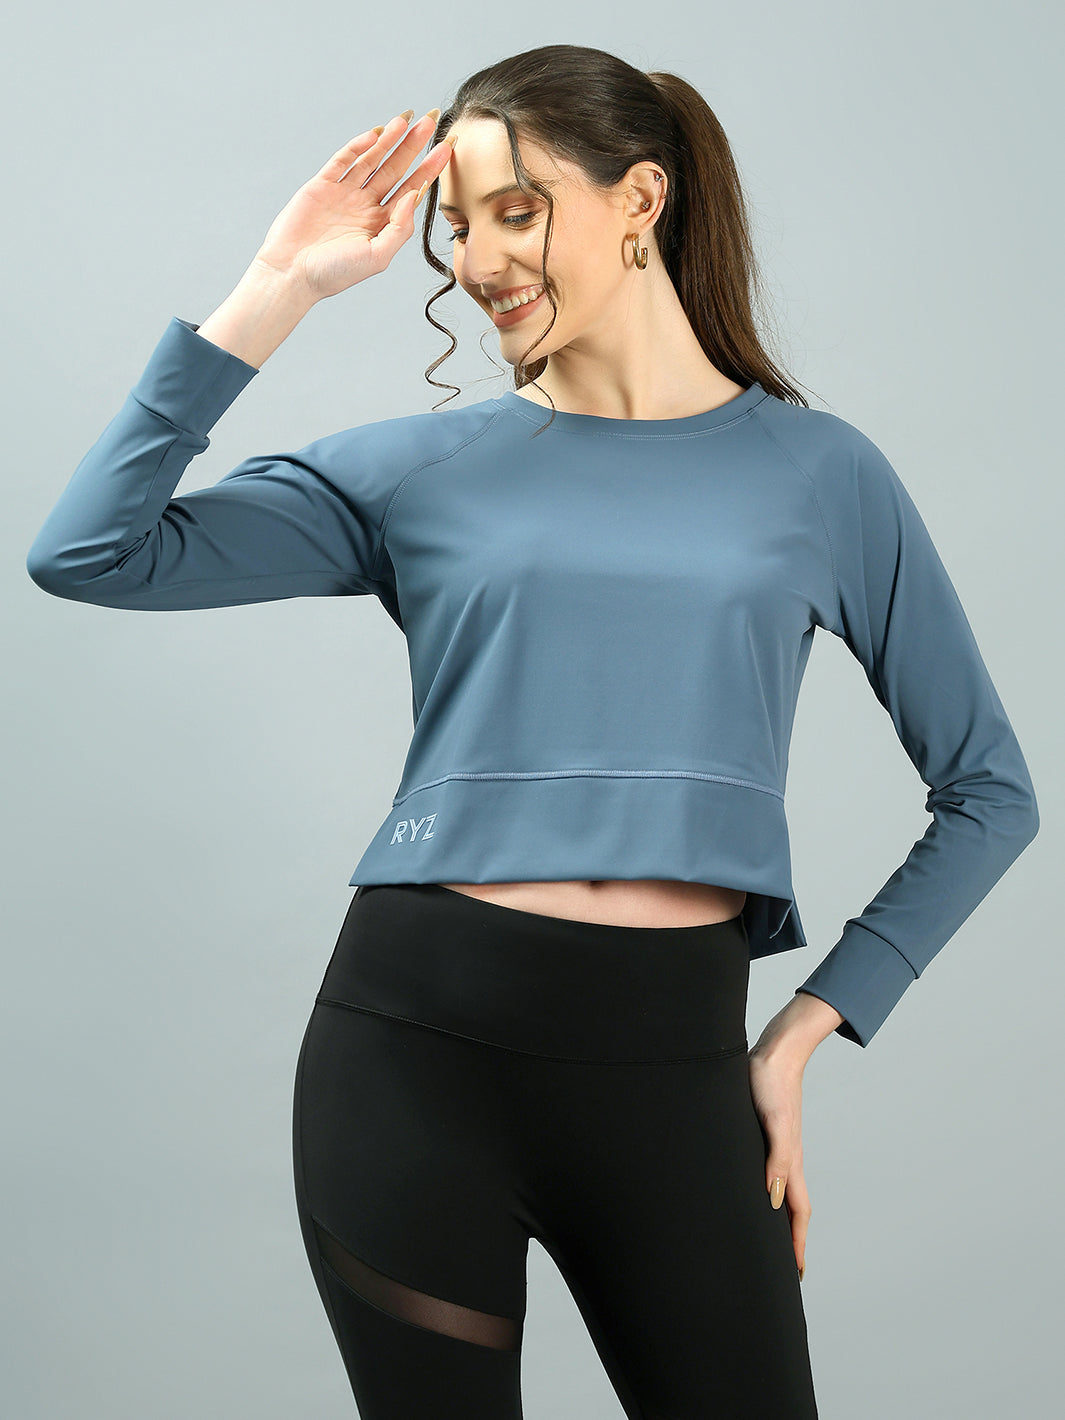 Softretch All Seasons Breathable Top | Full sleeves Sports Top (PB)